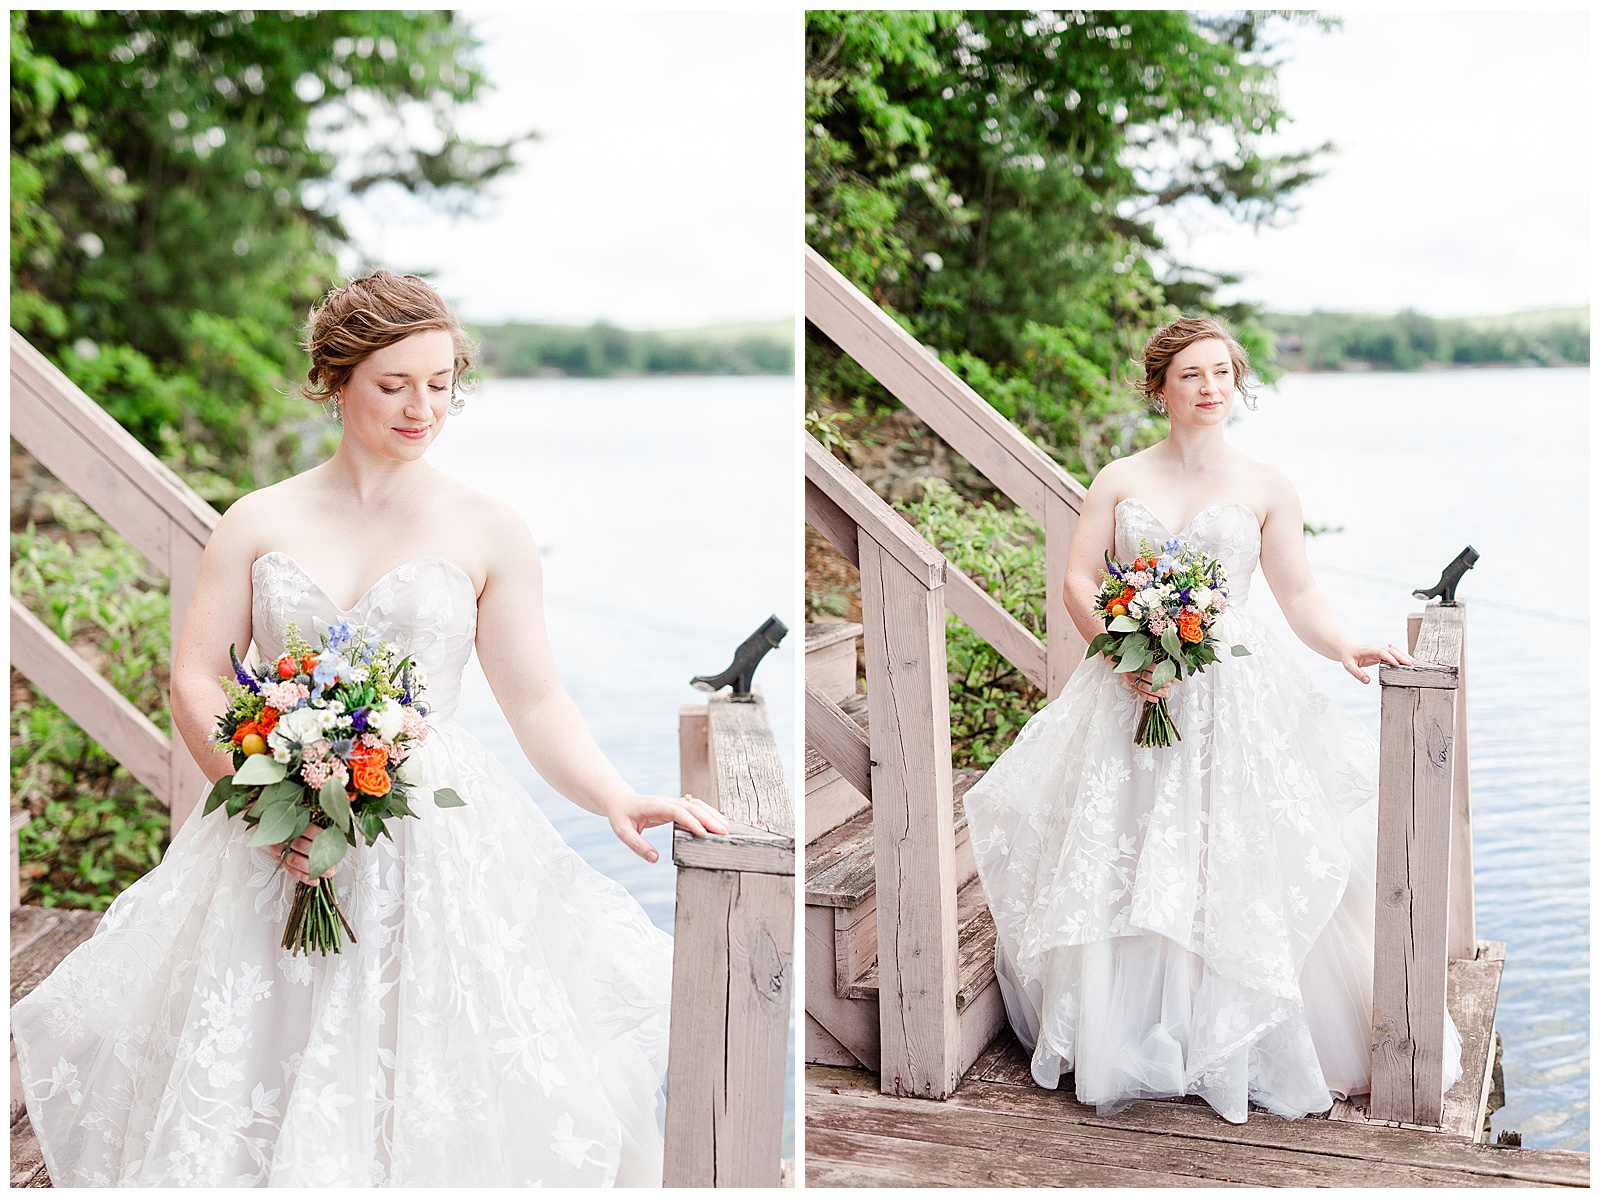 lakehouse location 👰 Bride: lace wedding dress + veil 💐 Colorful orange and blue bouquet 📸 Outdoorsy Lake and Mountain Bridal Session with Julia | Kevyn Dixon Photography